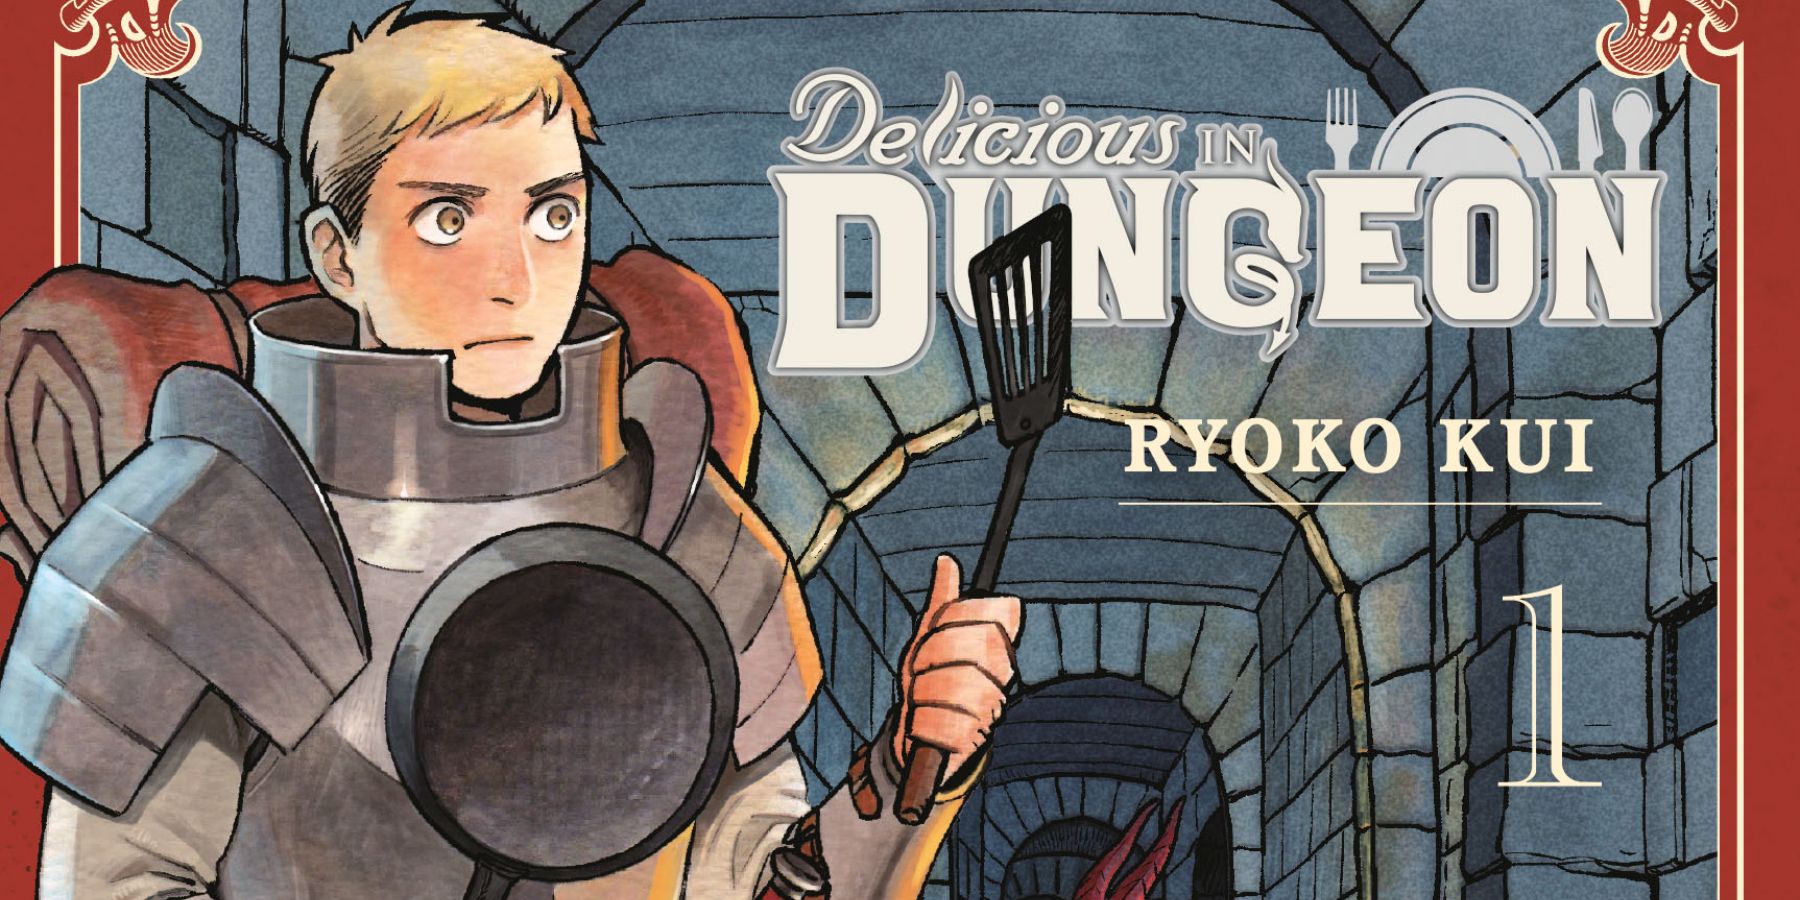 Laios in the Delicious in Dungeon manga cover pan spatula